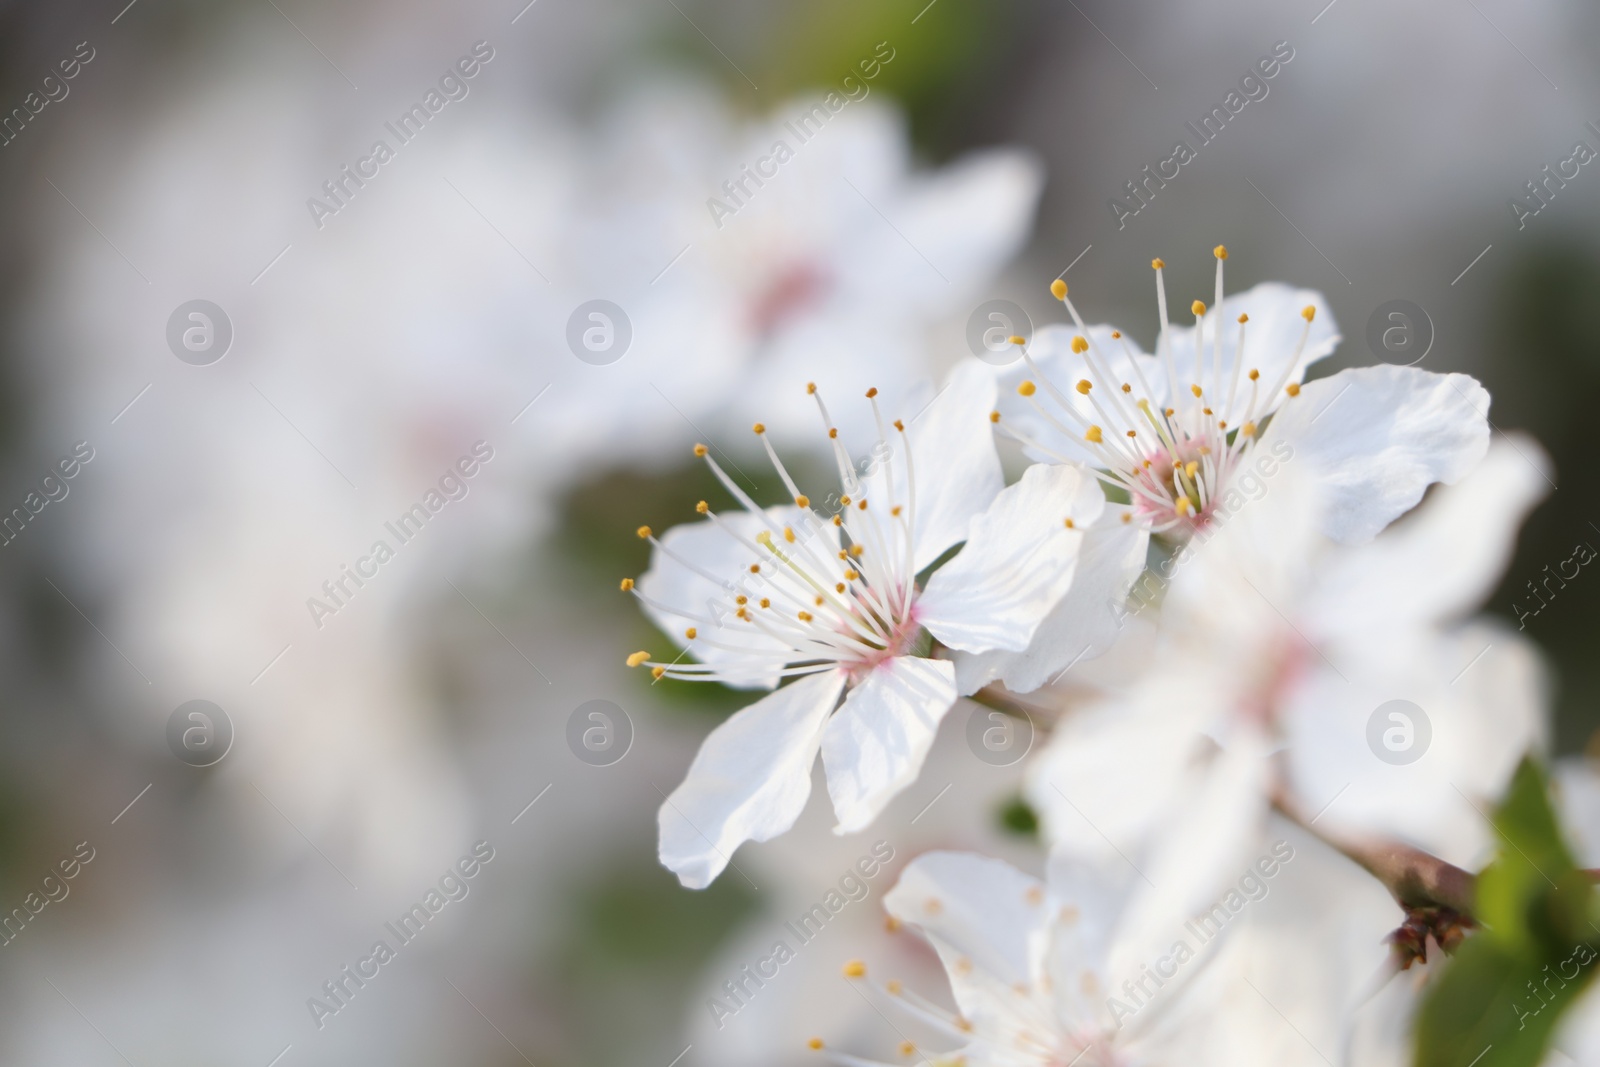 Photo of White blossoms of cherry tree on blurred background, closeup with space for text. Spring season